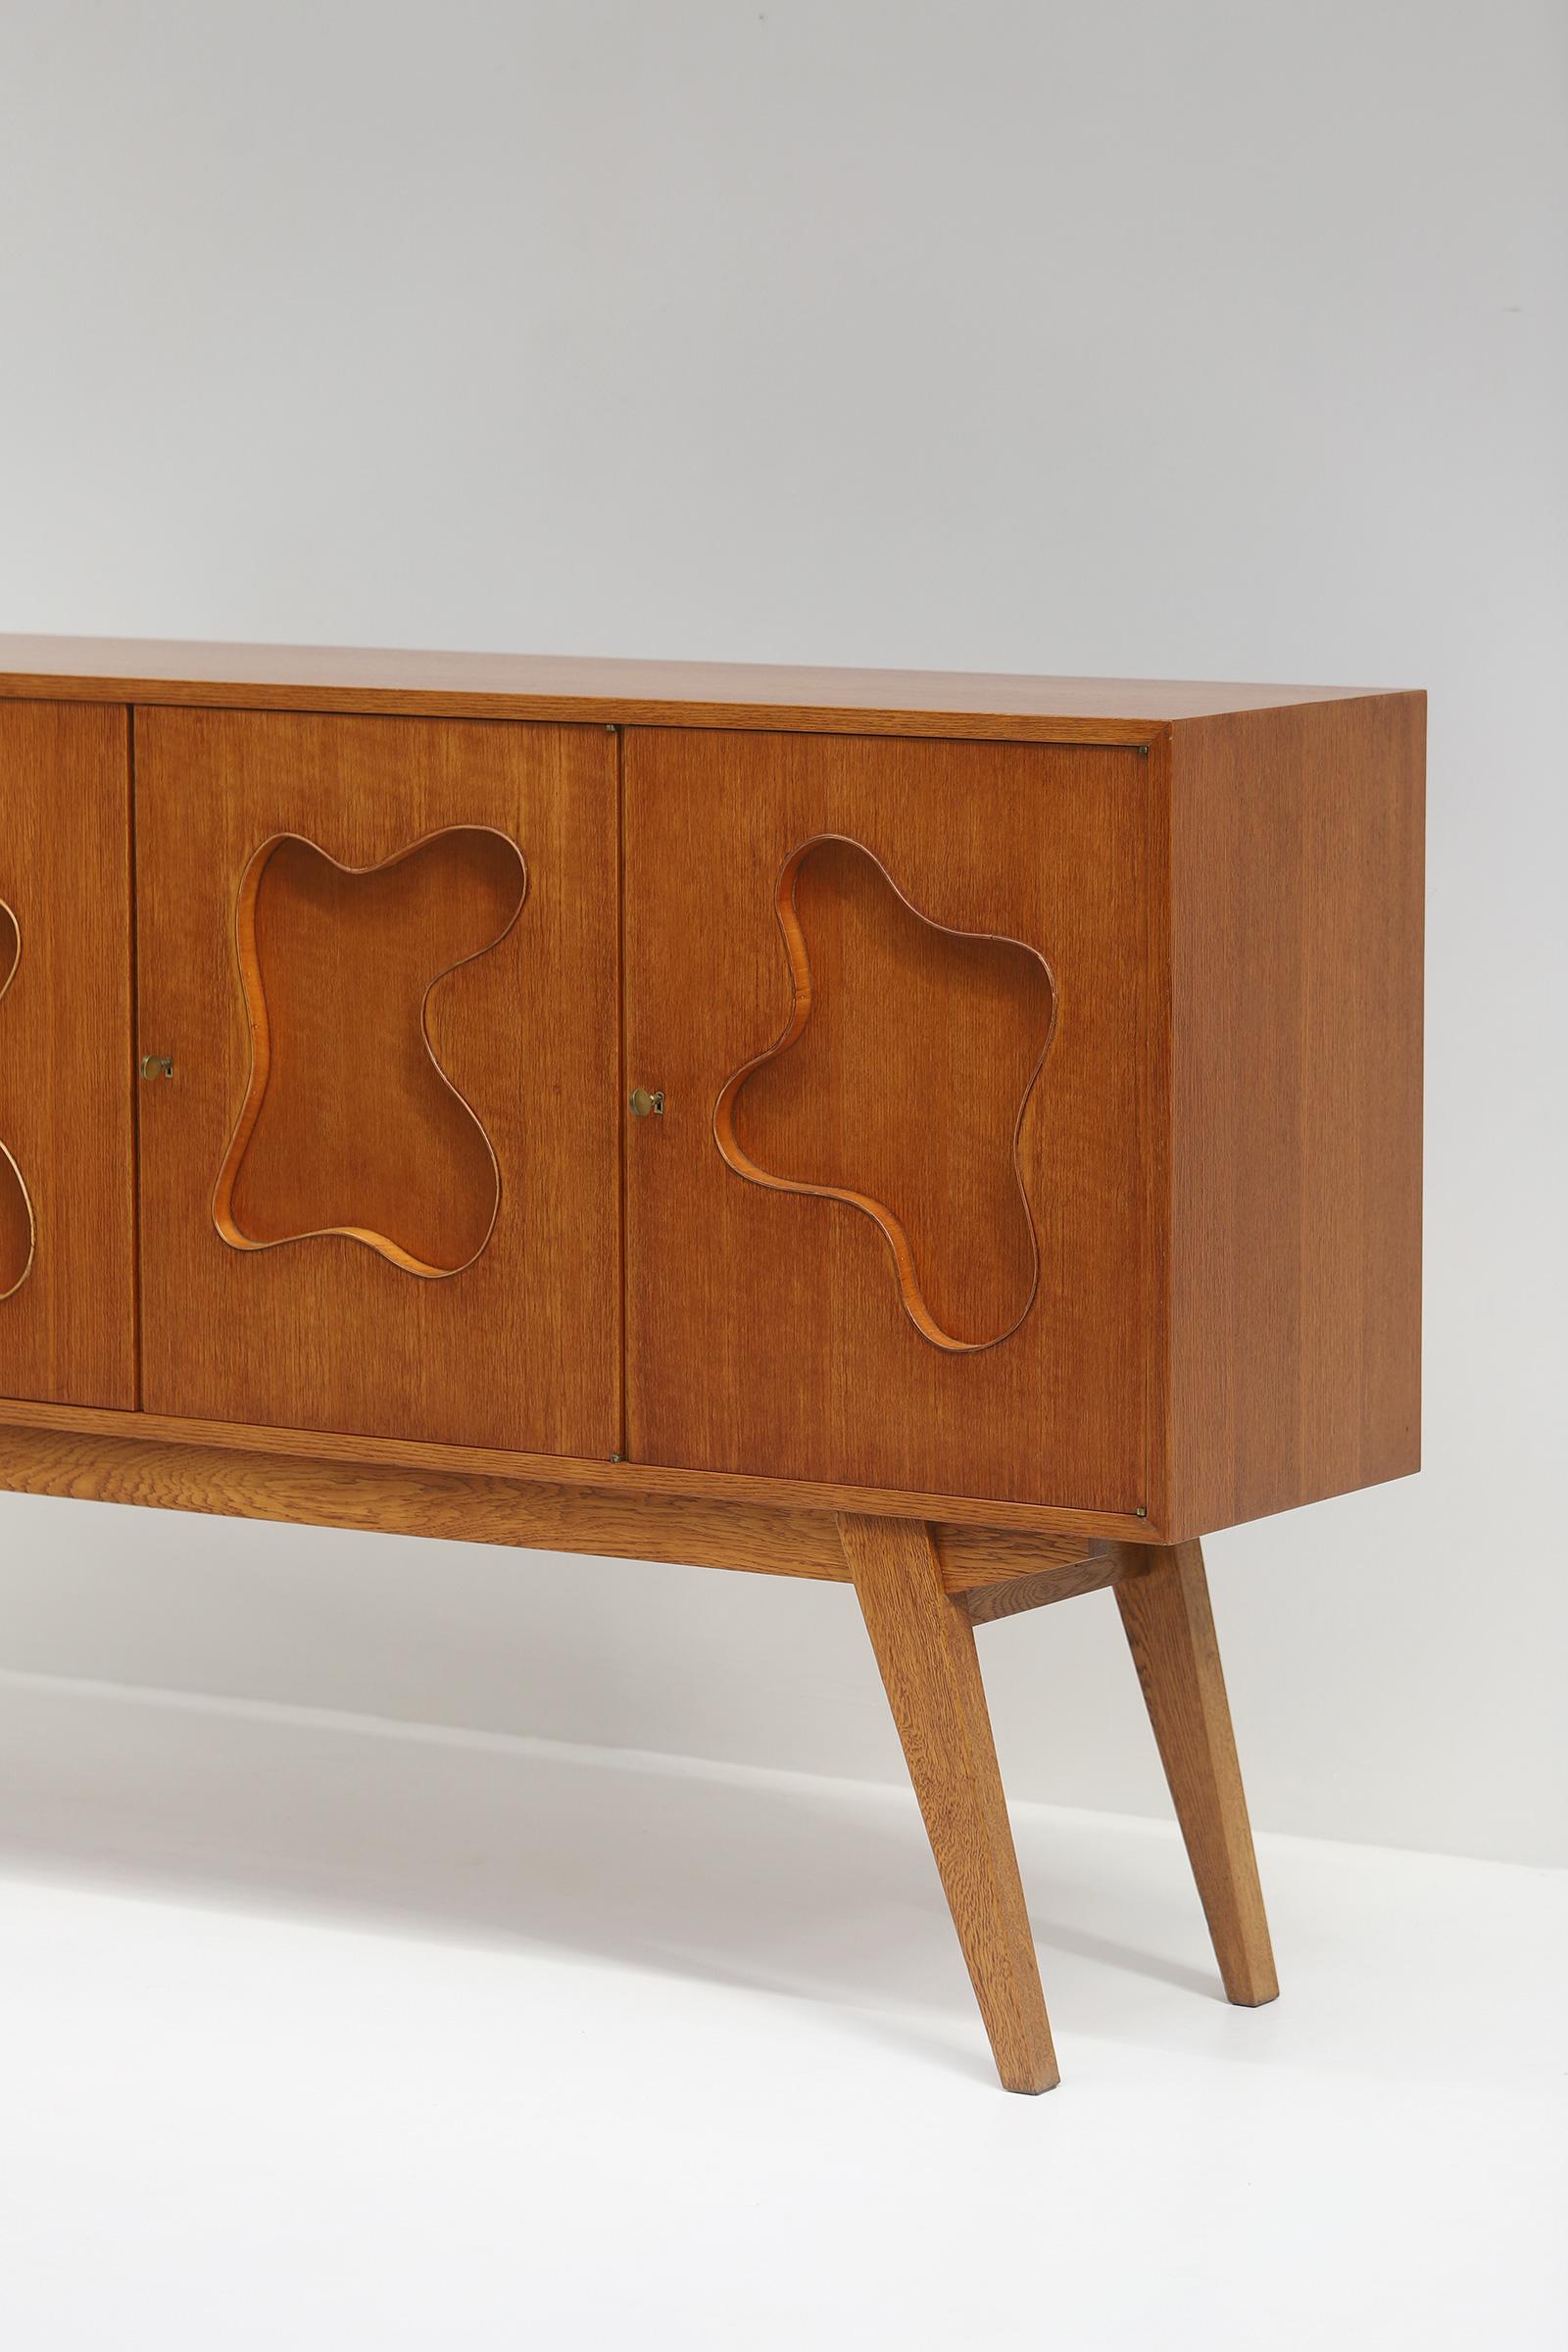 Oak Sideboard with Free Form Shaped Doors, 1950s 1